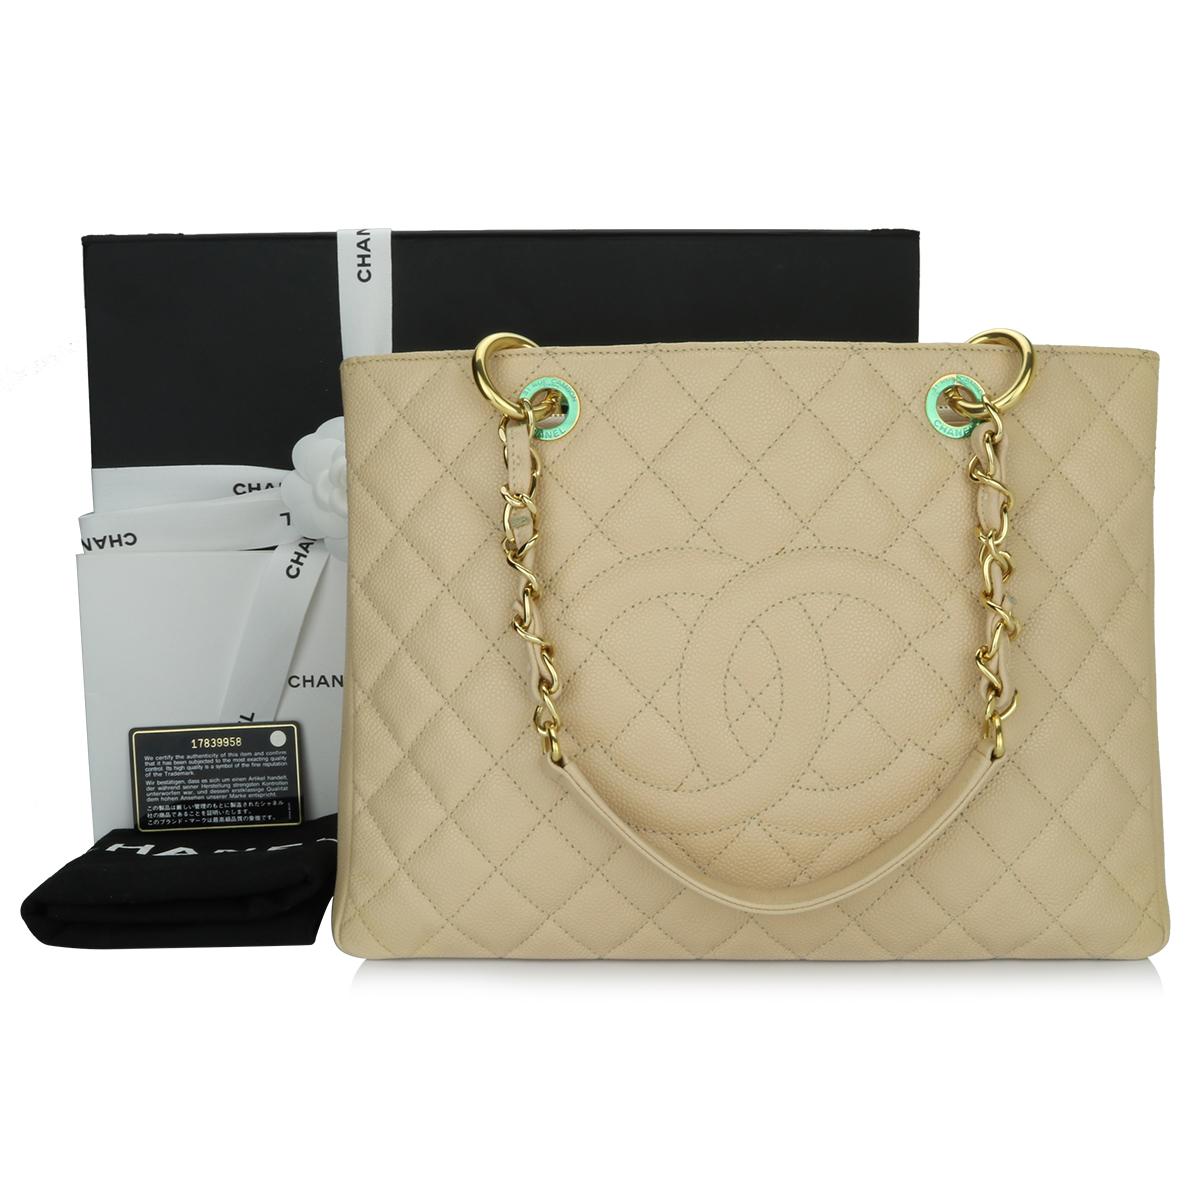 Authentic CHANEL Grand Shopping Tote (GST) Beige Clair Caviar with Gold Hardware 2013.

This bag is in excellent condition, the bag still holds its shape really well, and the hardware is still shiny.

Exterior Condition: Excellent condition, corners